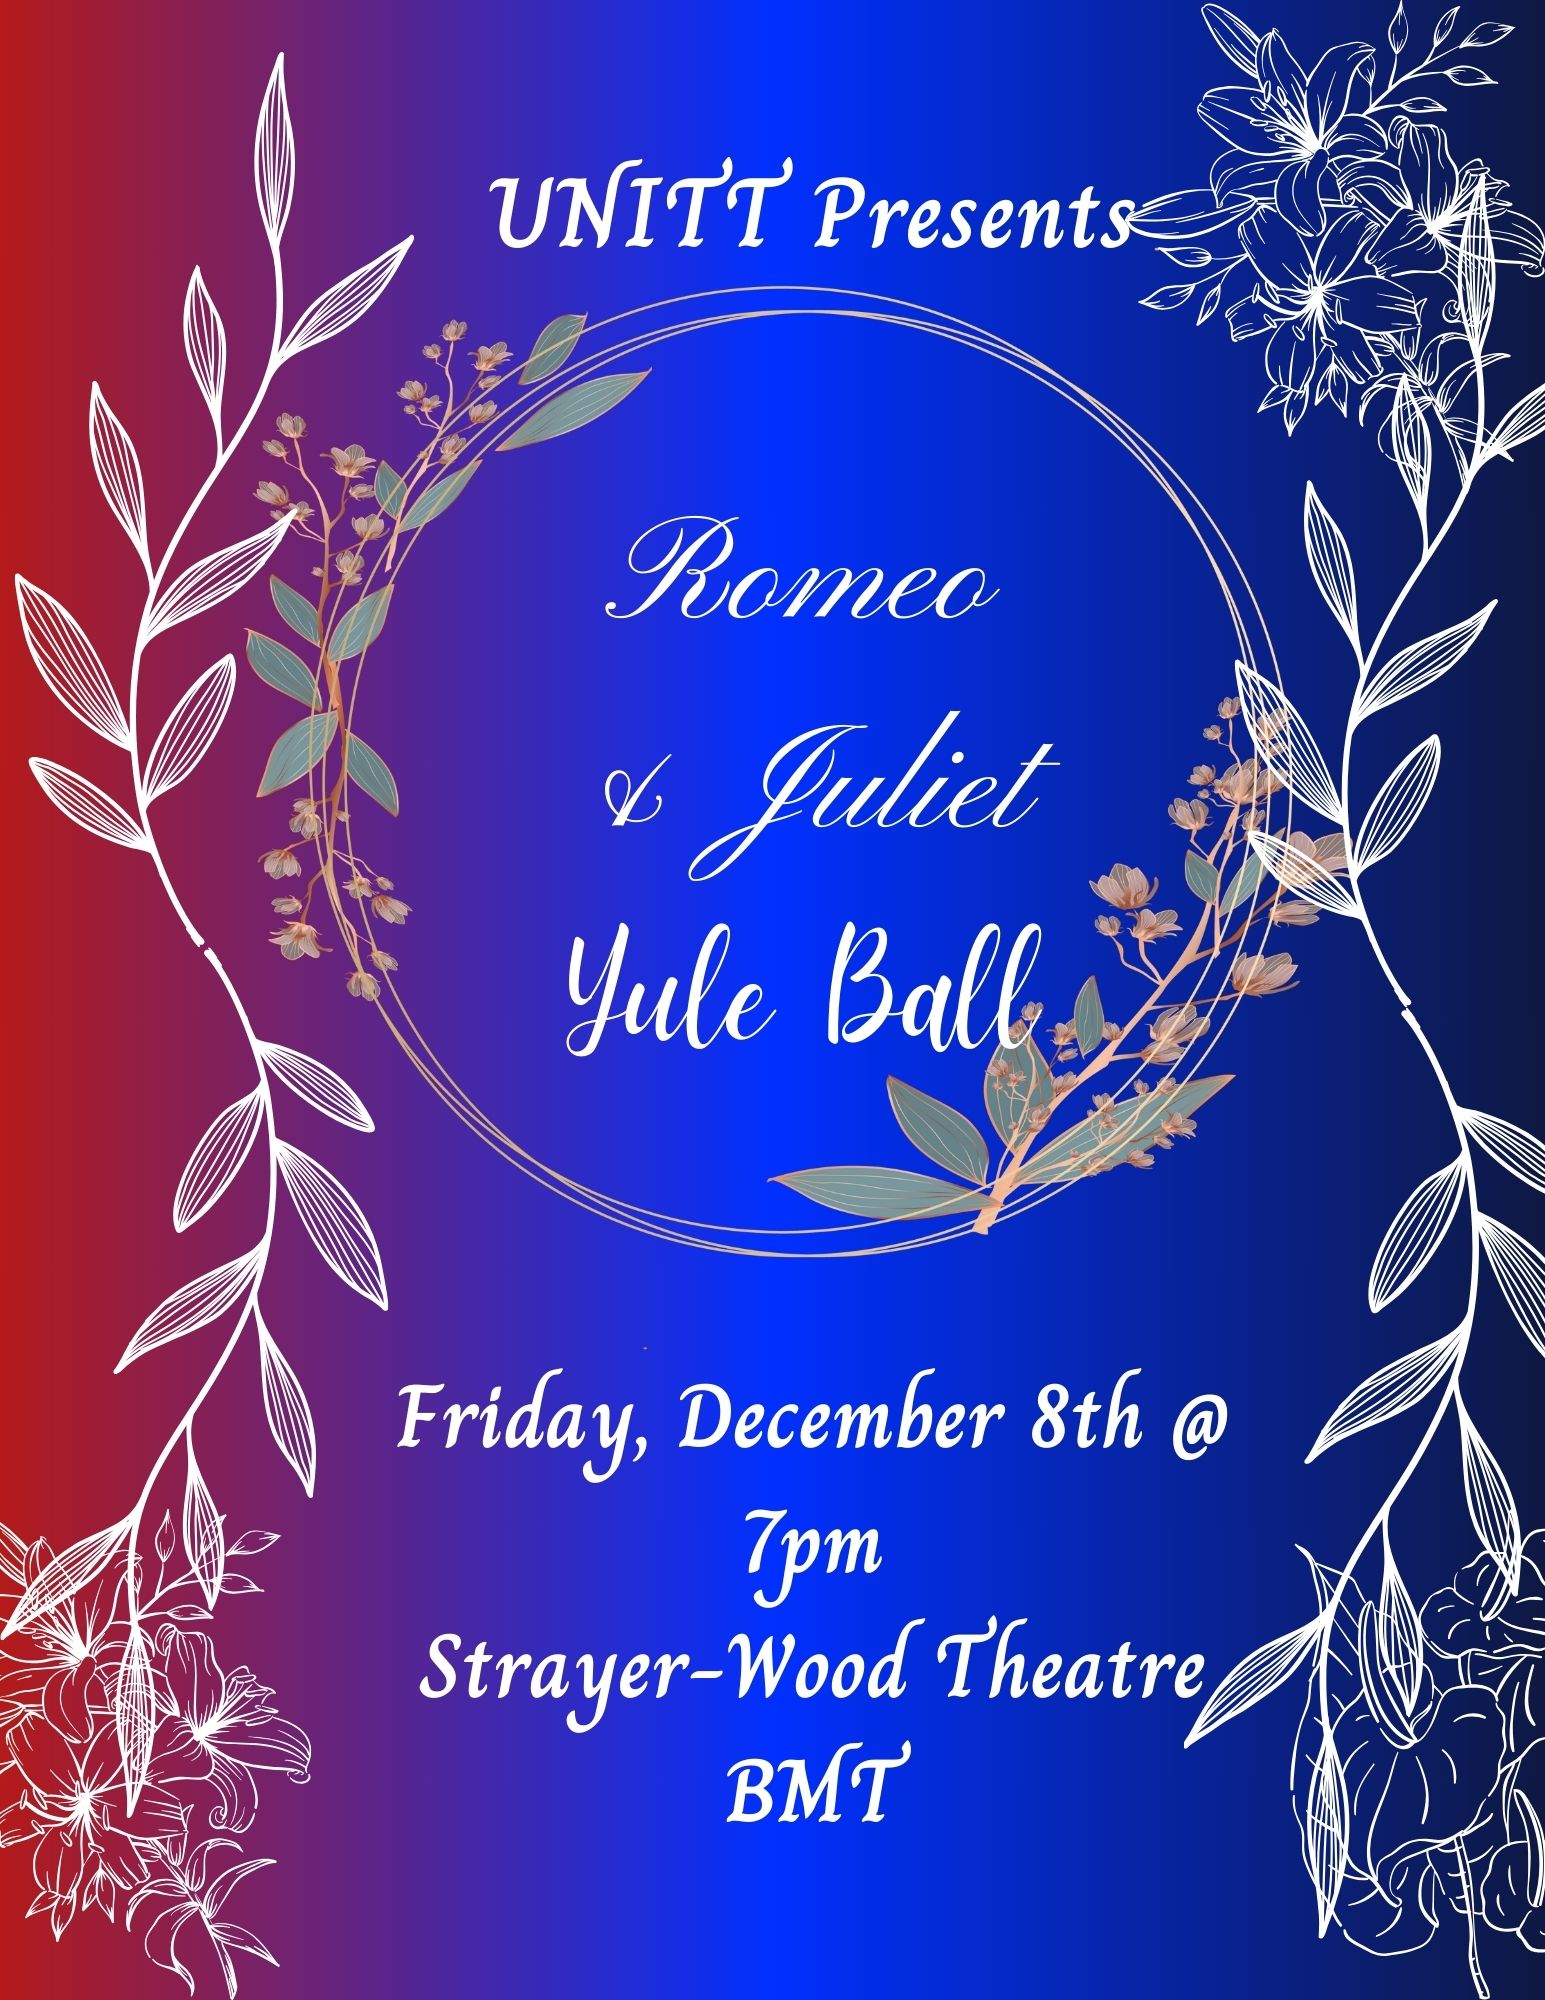 A poster advertising the yule ball 